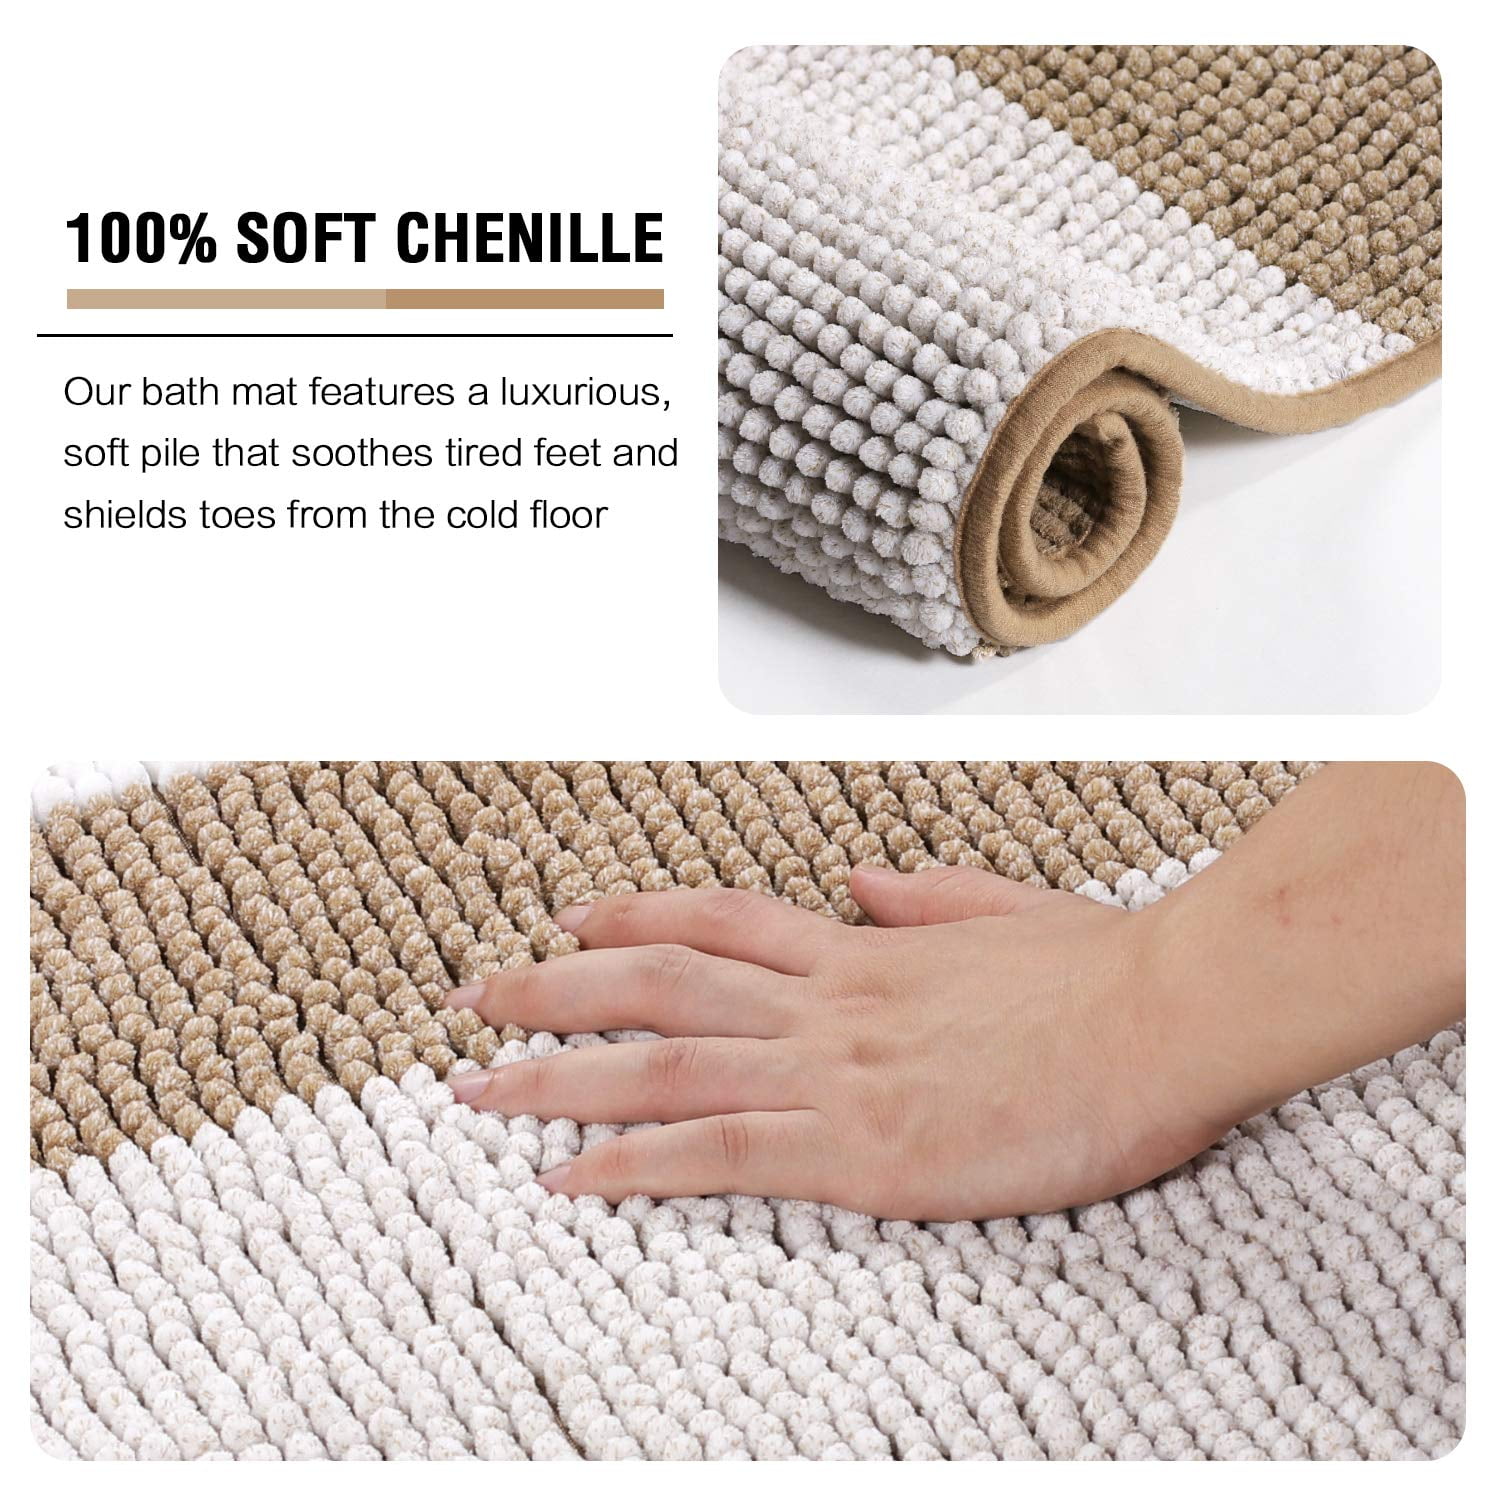 Absorbent Bathroom Rug Light Gray Soft Plush Bath Rug Non Slip Carpet Rugs for Shower Front Door 24x70 in Entryway Easy-Going Luxury Chenille Striped Pattern Bath Mat Bedroom 